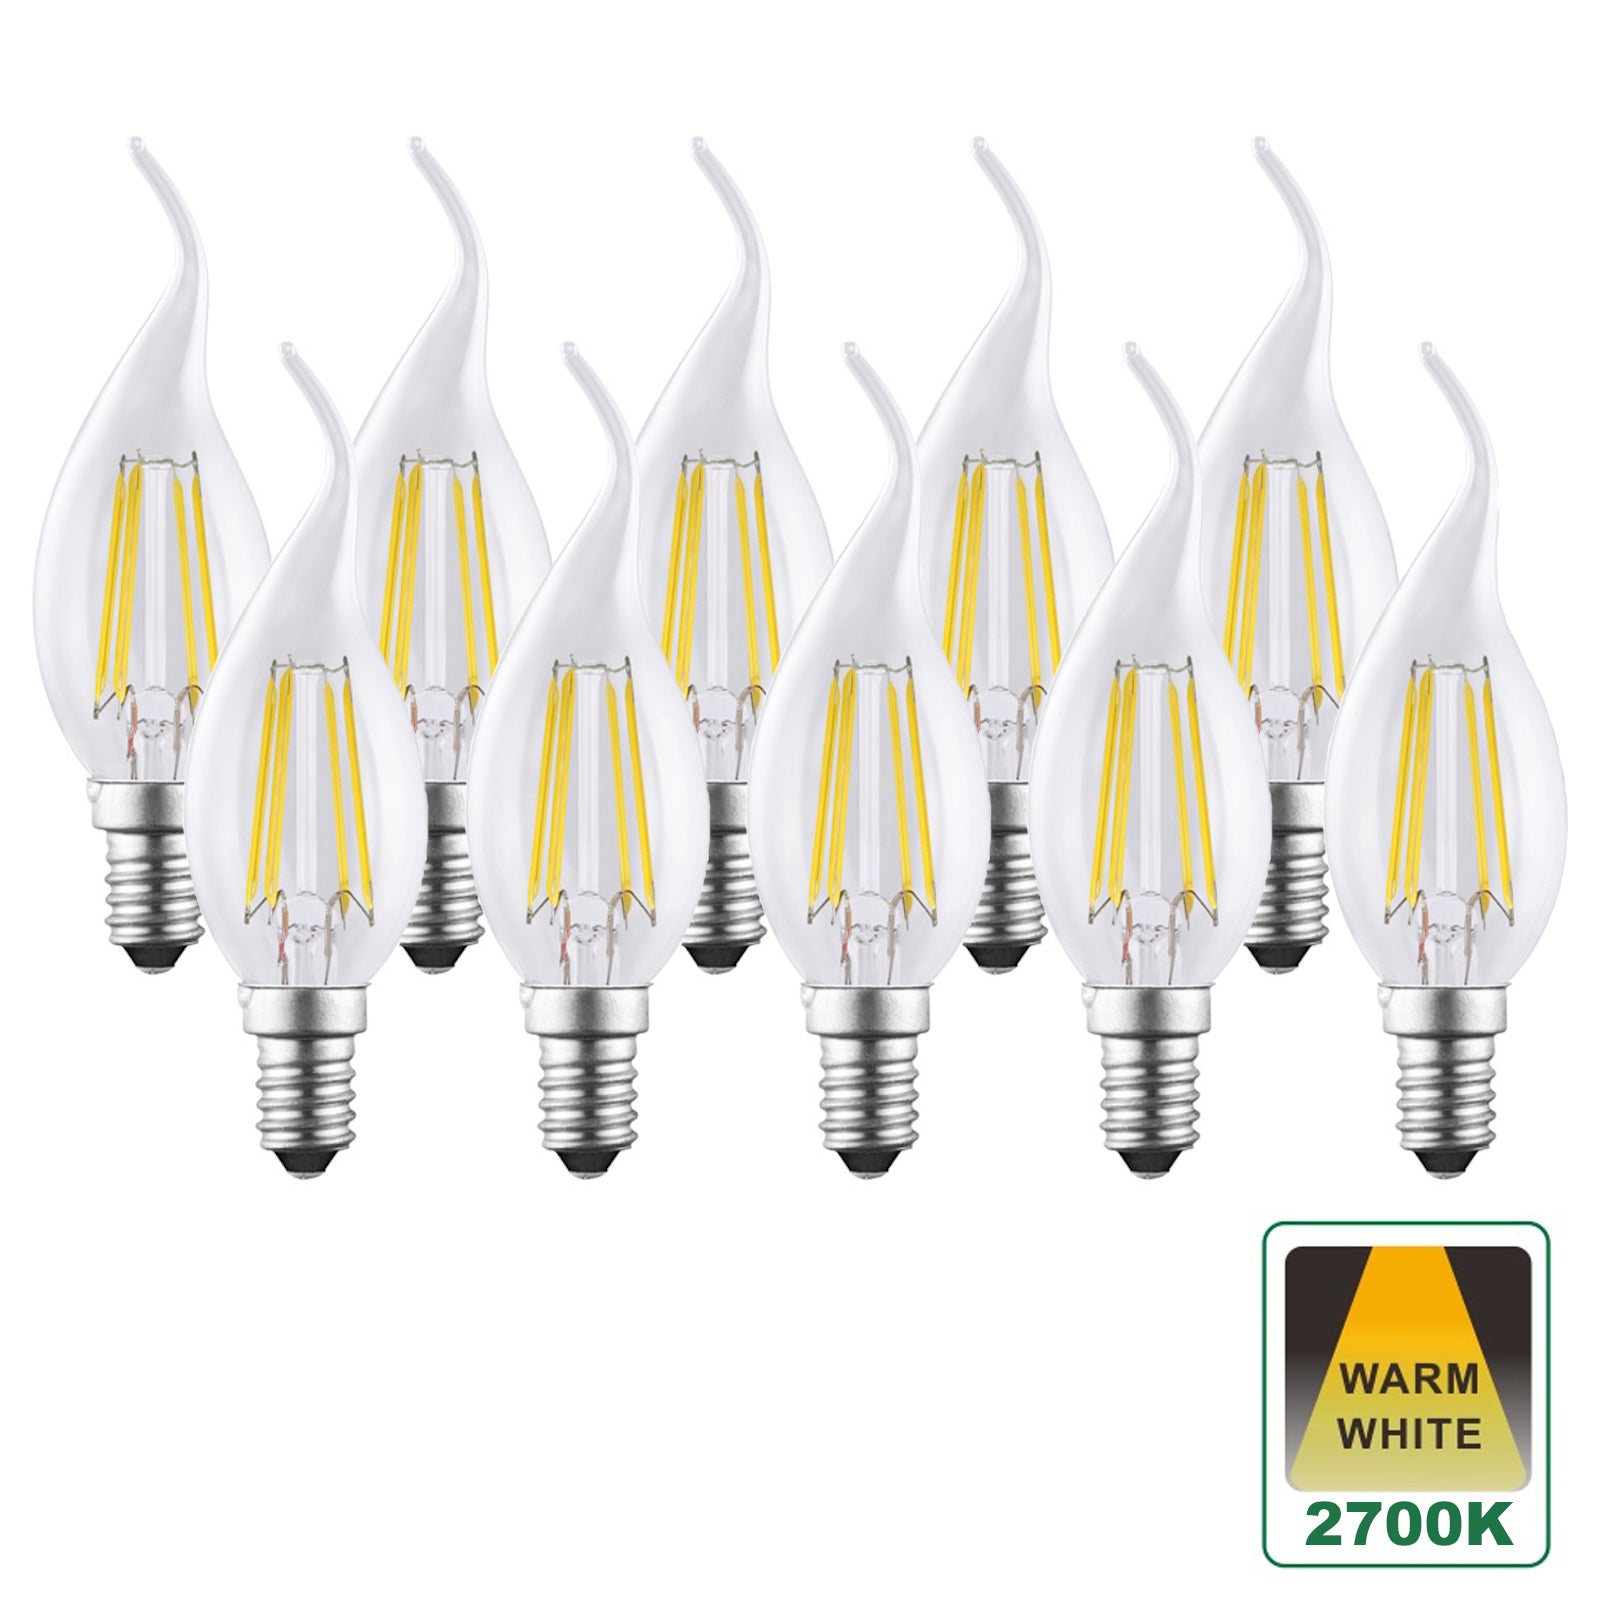 Harper Living E14 4.5 W Clear Glass Warm White Dimmable LED Bent Tip Candle Bulbs, Pack of 10